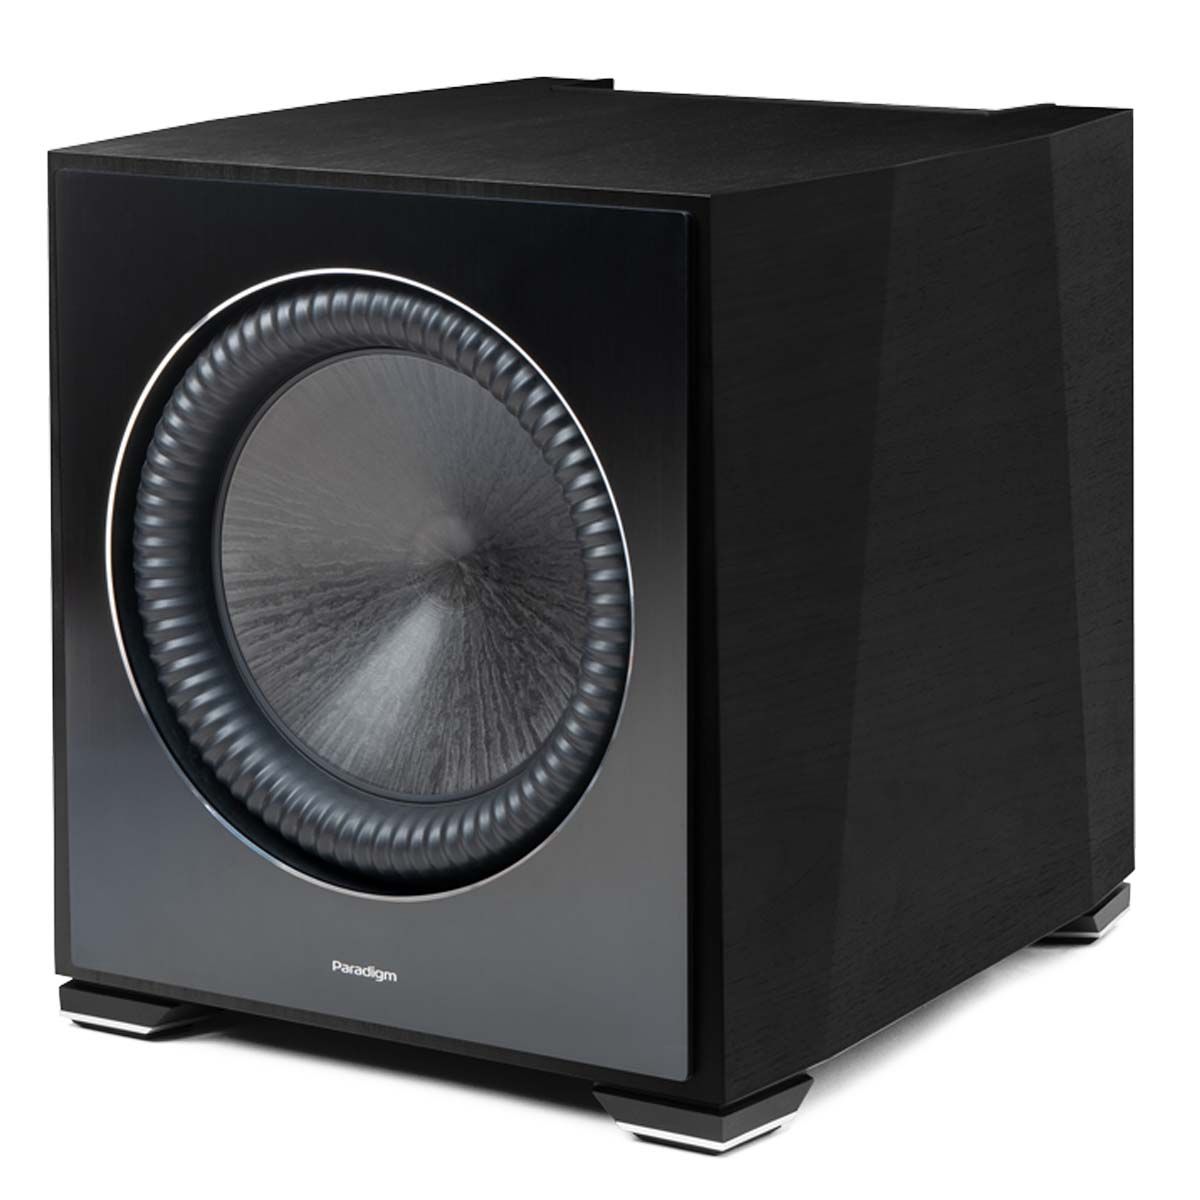 Paradigm XR13 Subwoofer - Black Walnut angled front view without grille